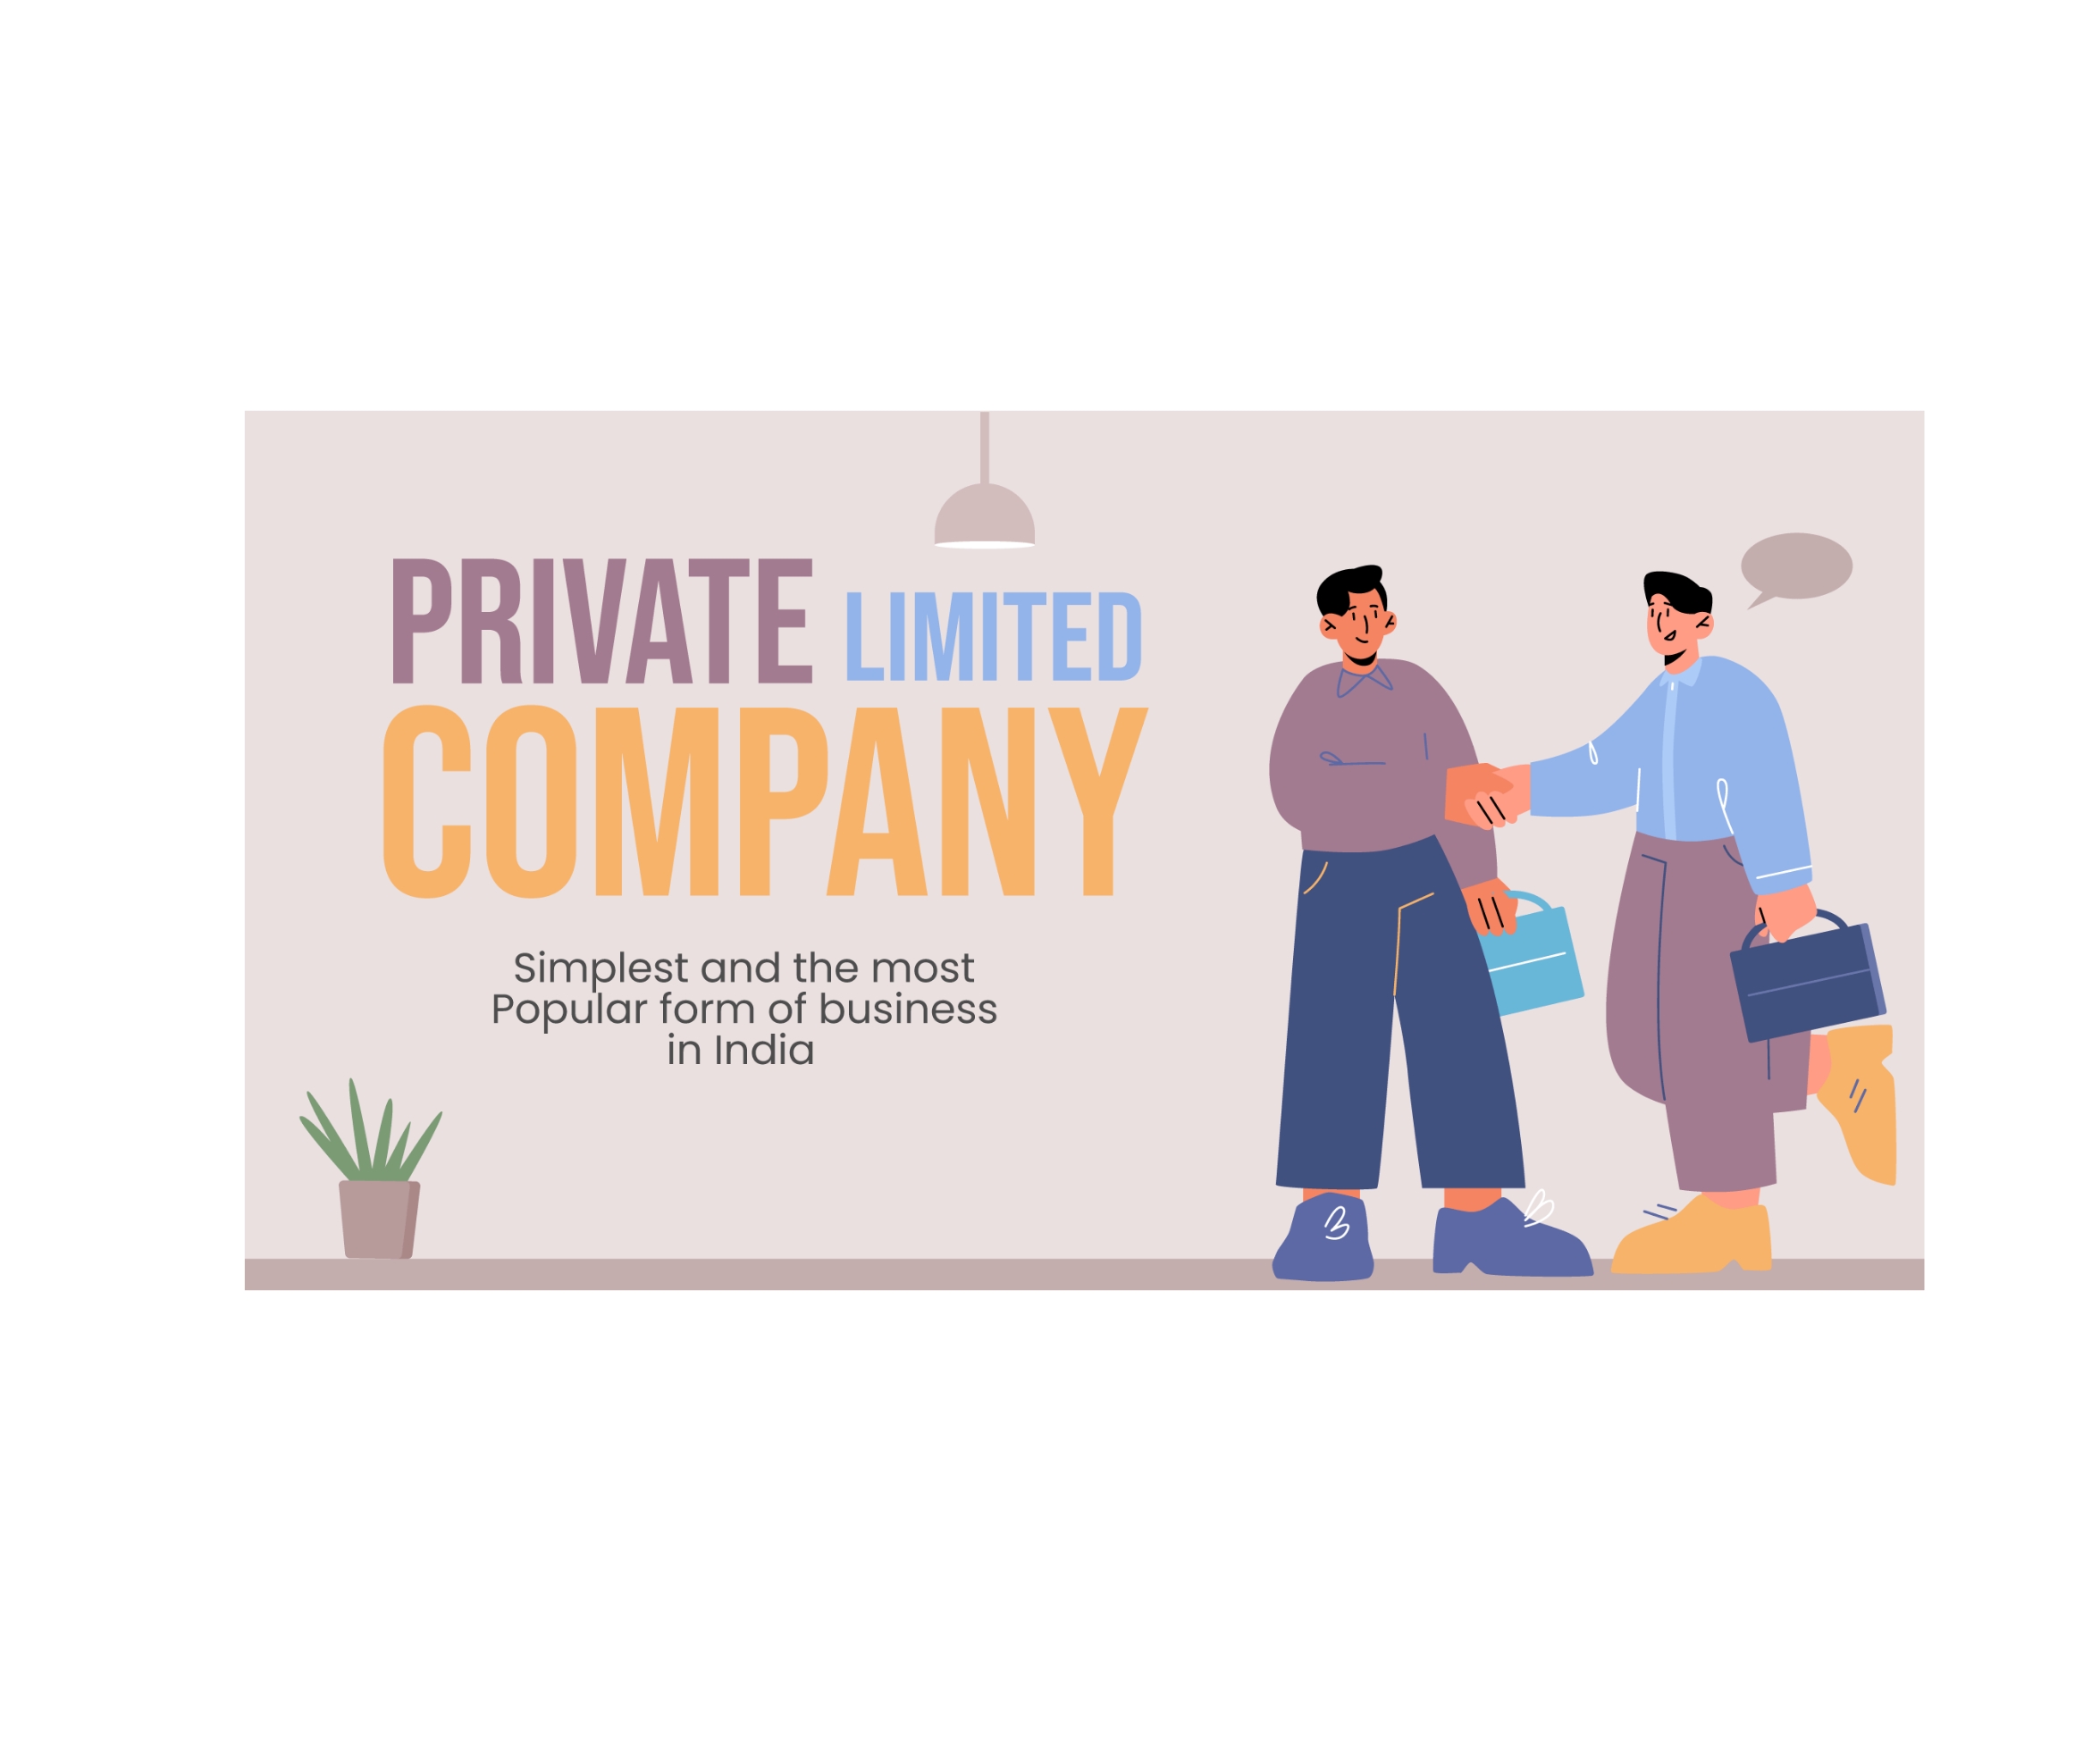 Can a private limited company be a proprietor